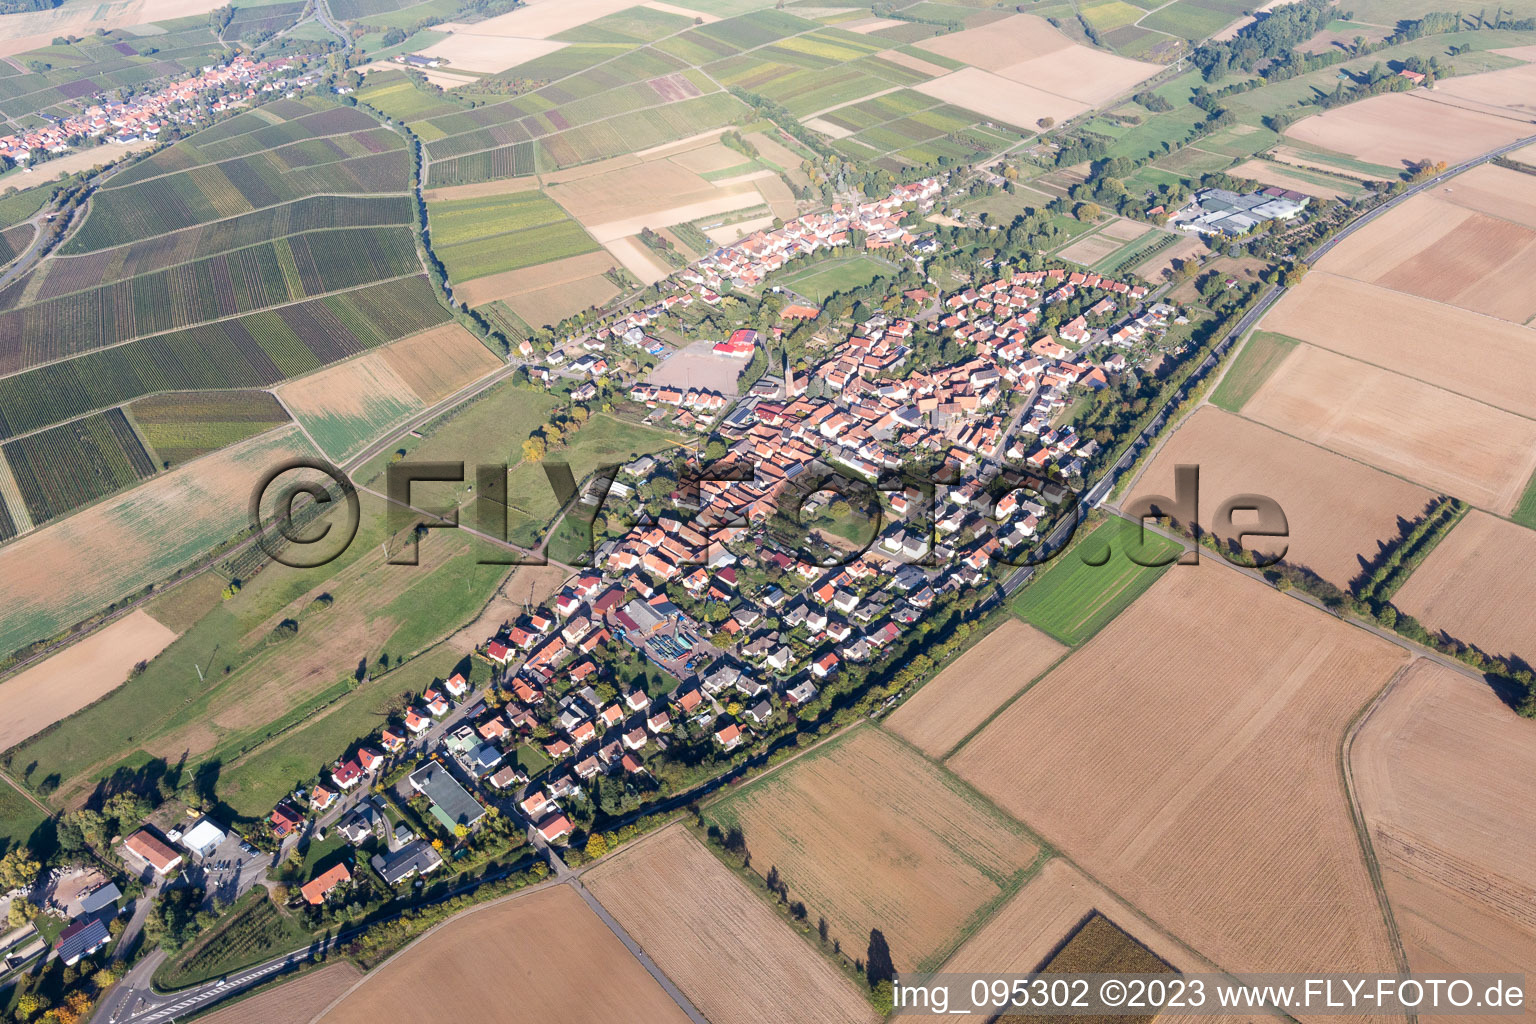 District Kapellen in Kapellen-Drusweiler in the state Rhineland-Palatinate, Germany seen from above